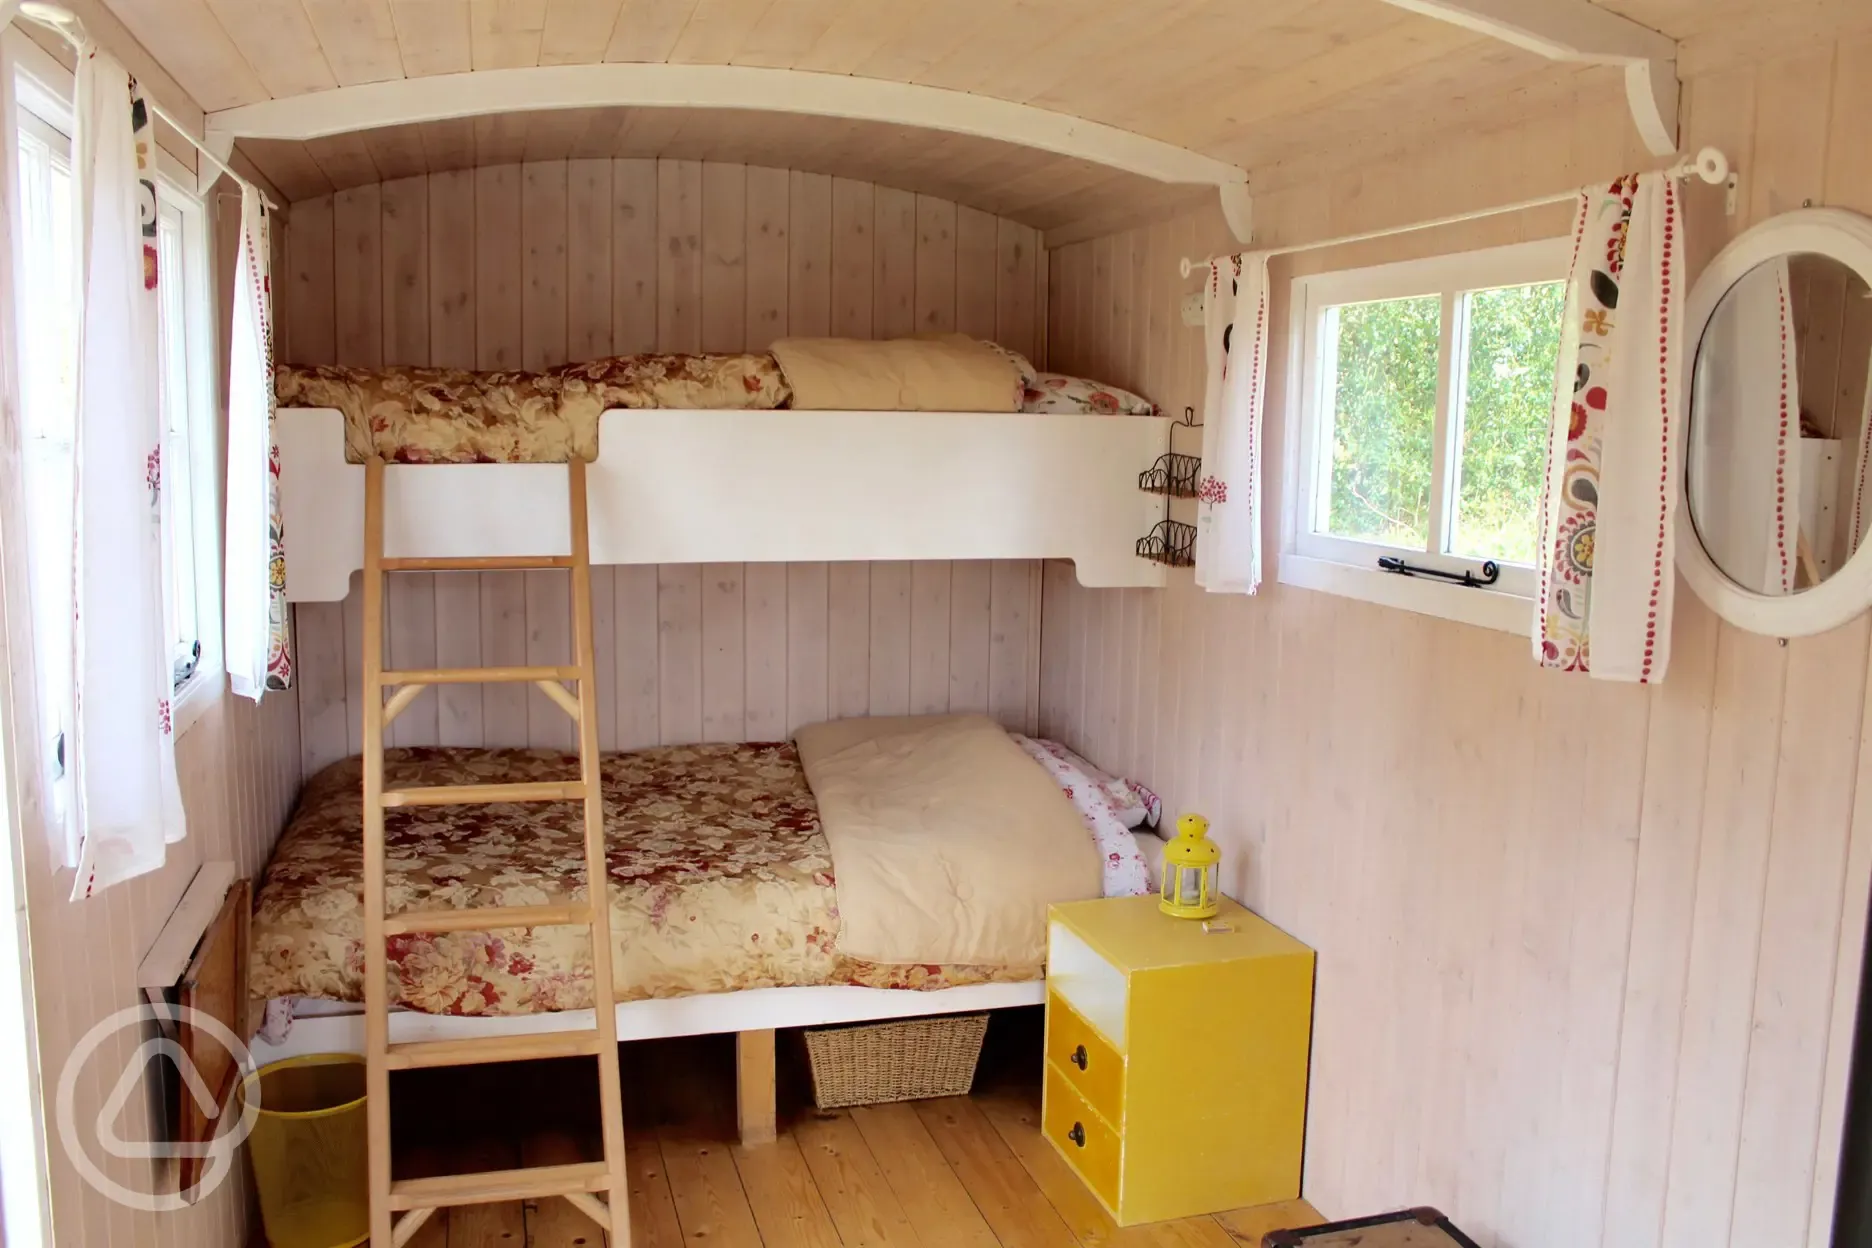 Bunk bed set up in our larger huts